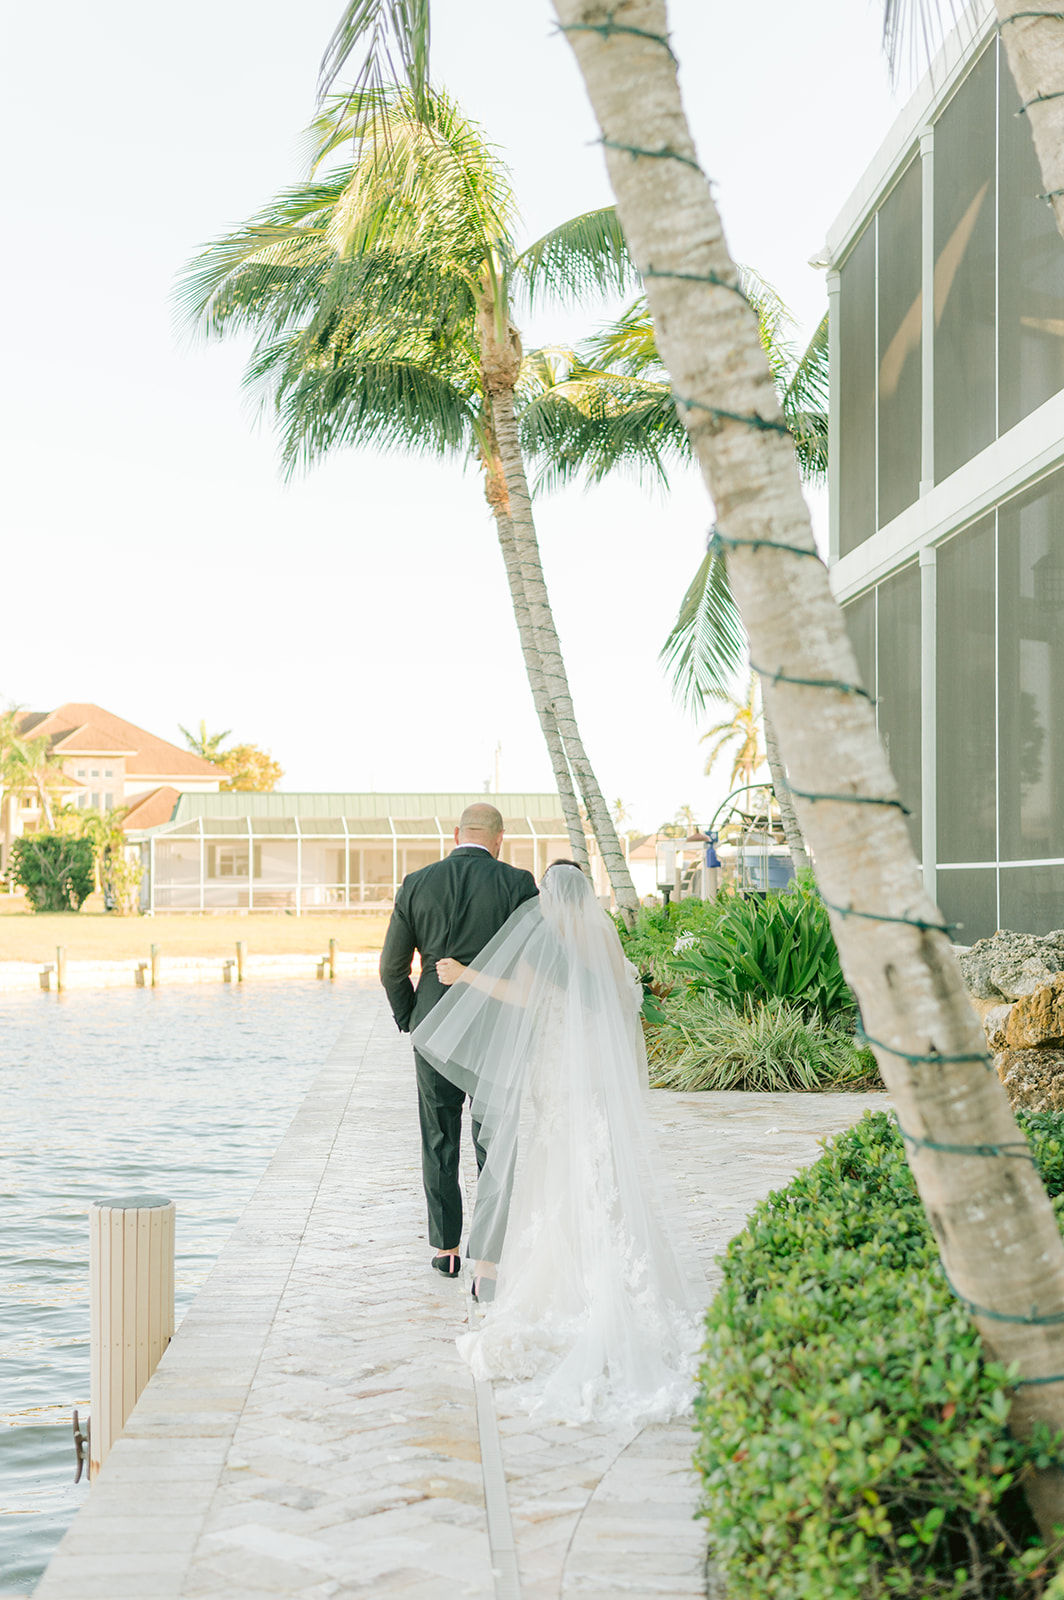 Marco Island Beach Wedding Photography - A Stunning Backdrop for Your Big Day
